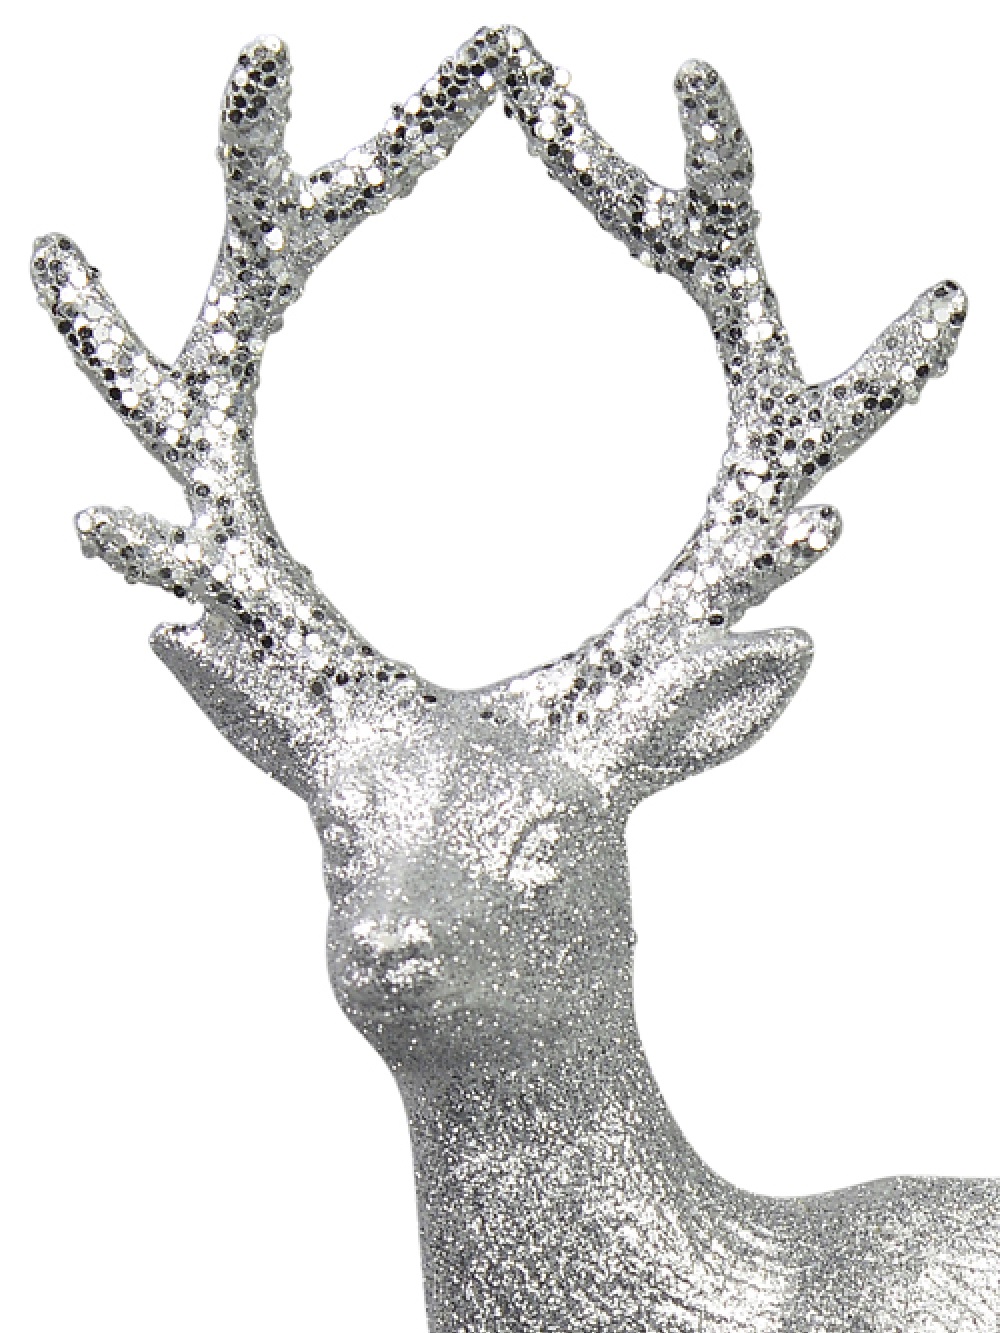 Reindeer Christmas Decoration Sparkly Glitter White Silver Statues Christmas Dec